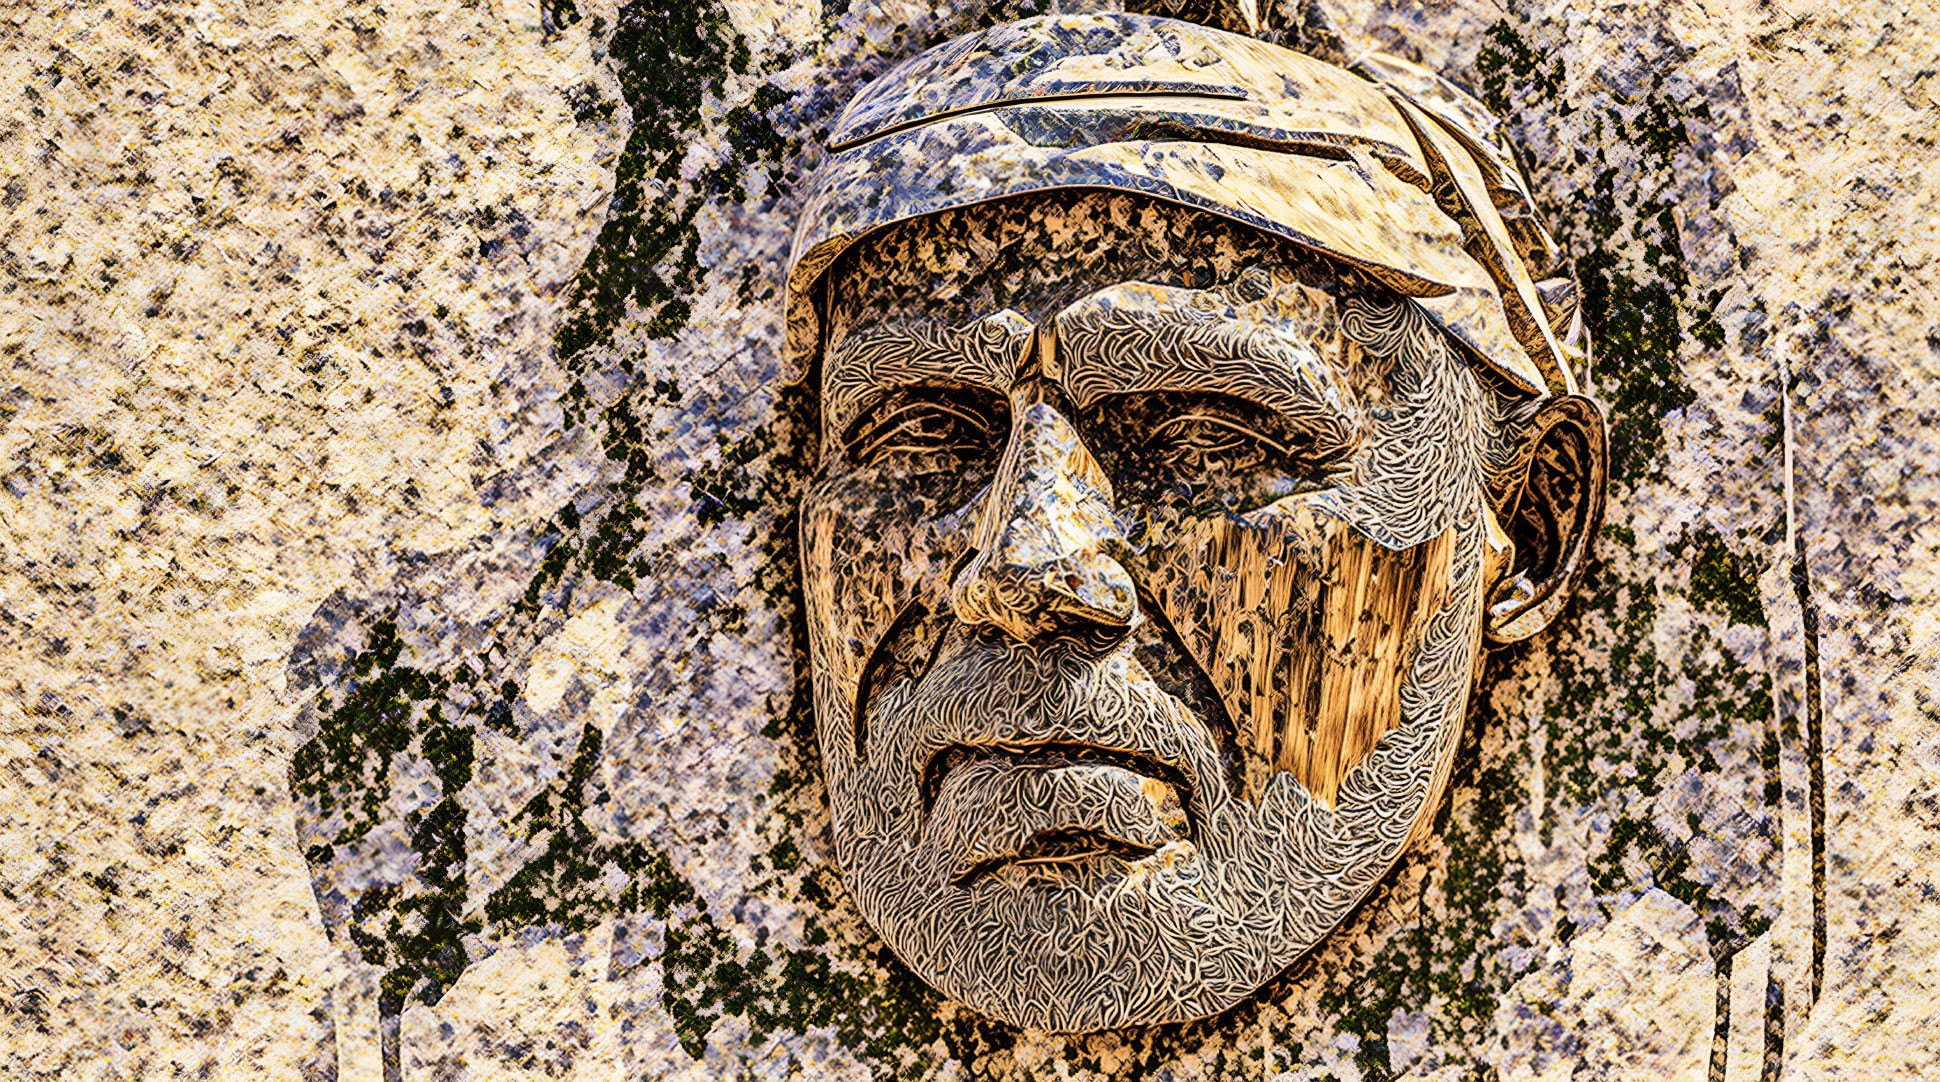 Metallic Face Sculpture with Detailed Textures on Speckled Stone Background